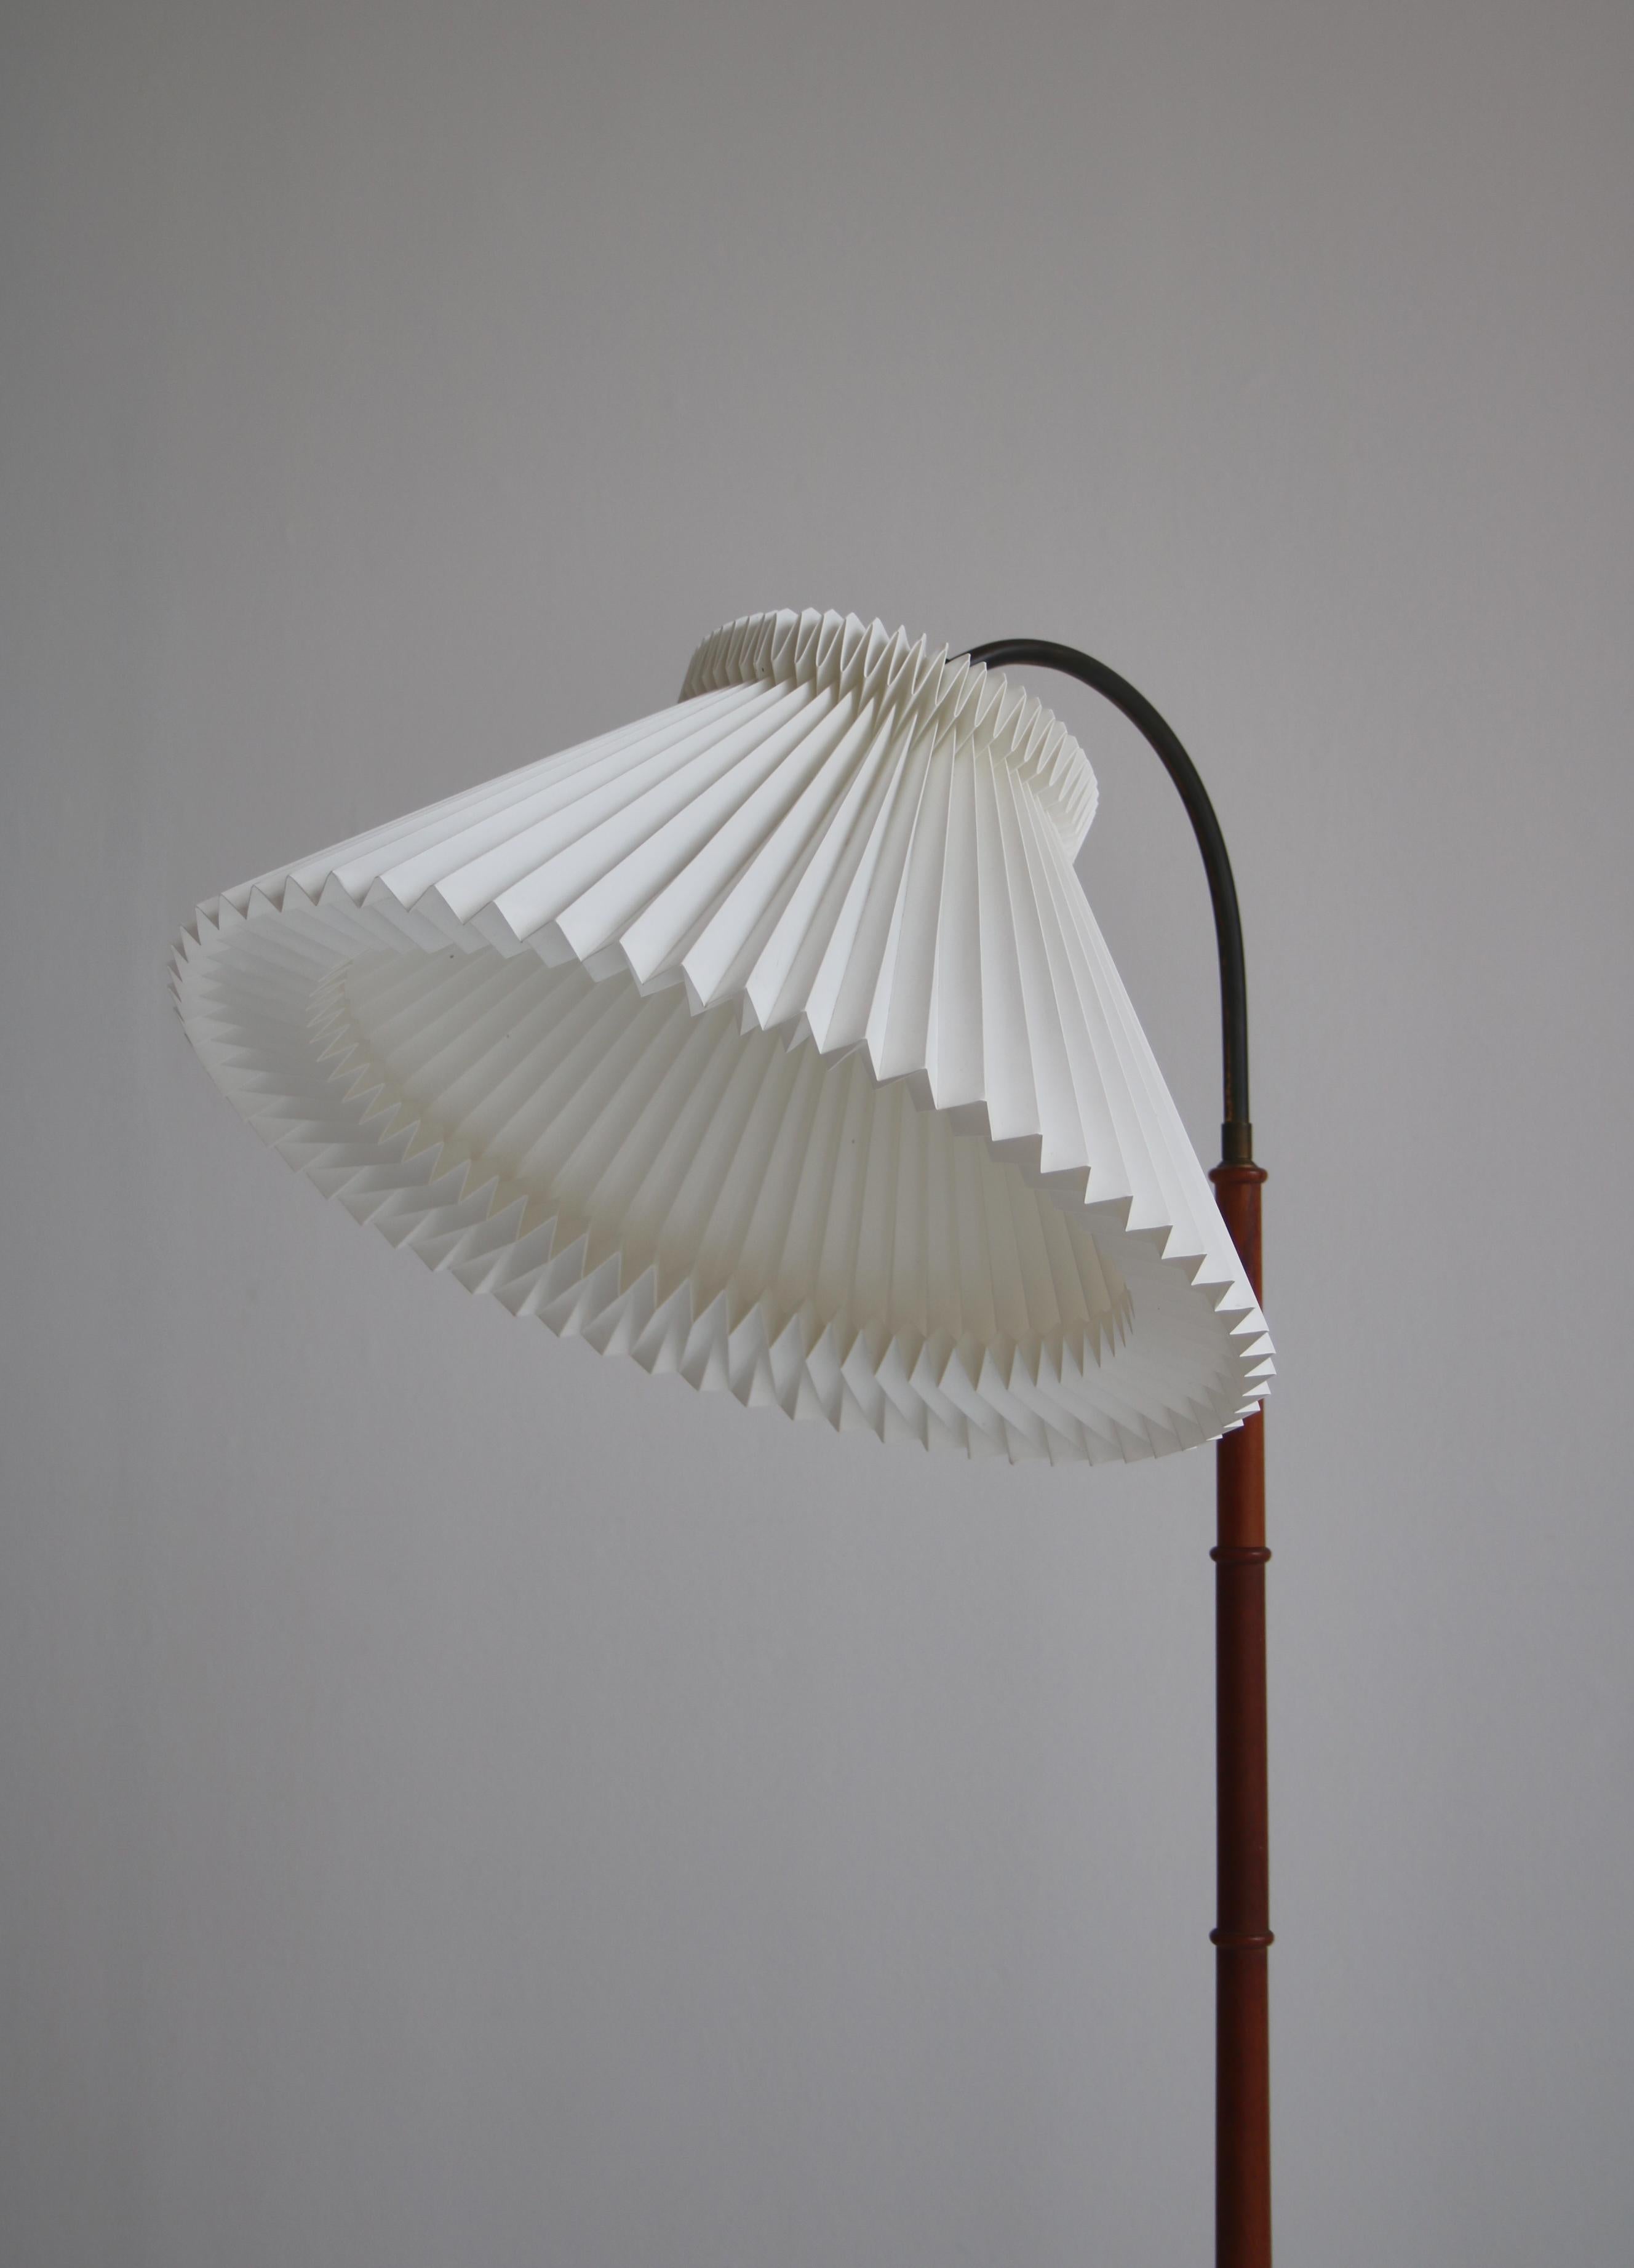 Danish Modern Floor Lamp in Teak with Hand Folded Le Klint Shade, 1950s In Good Condition For Sale In Odense, DK